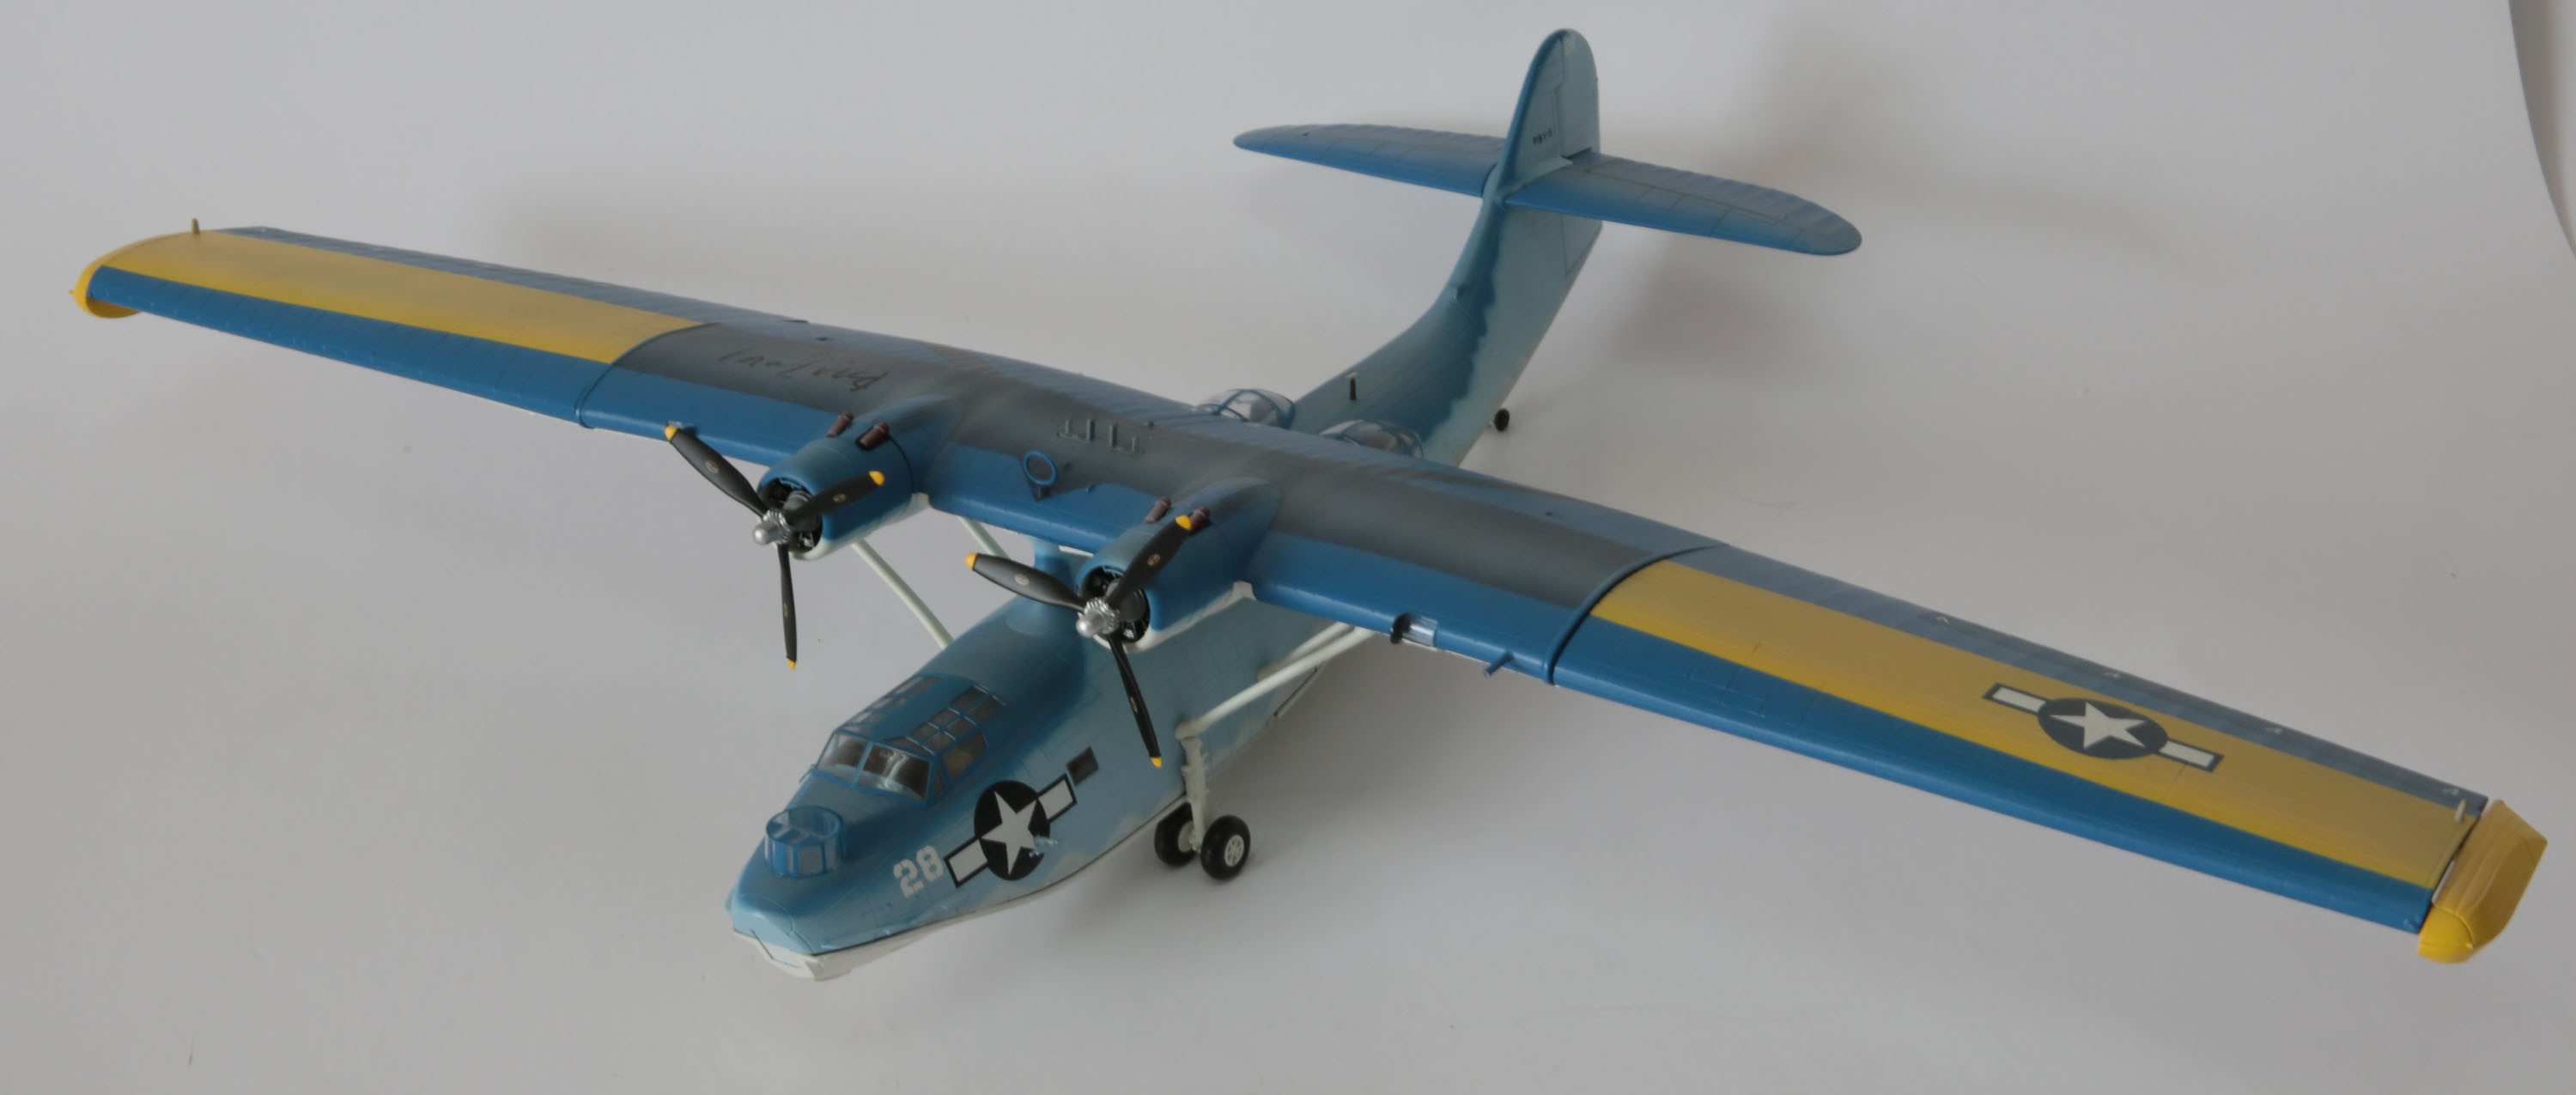 Metal Plane Display Decoration Pby Seaplane Model in 1/48 Scale with All Extra Details